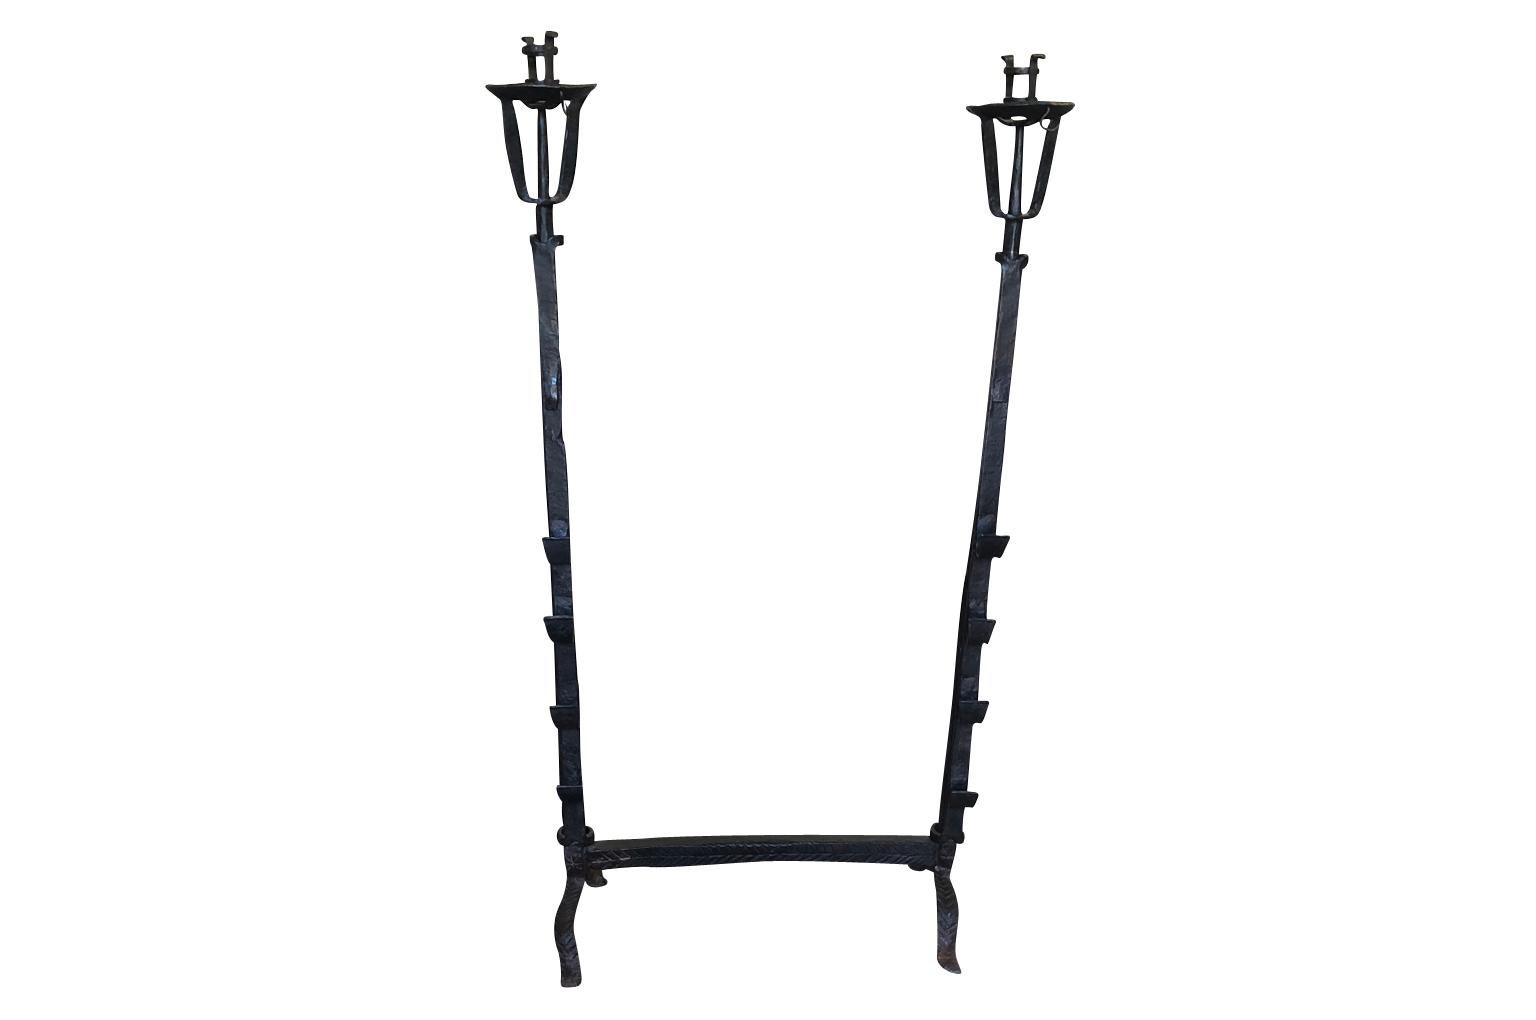 A very attractive 18th century fireplace fitment handsomely constructed from hand forged iron. Fireplace fitments such as this one were used in the large walk in kitchen fireplaces and used for cooking.